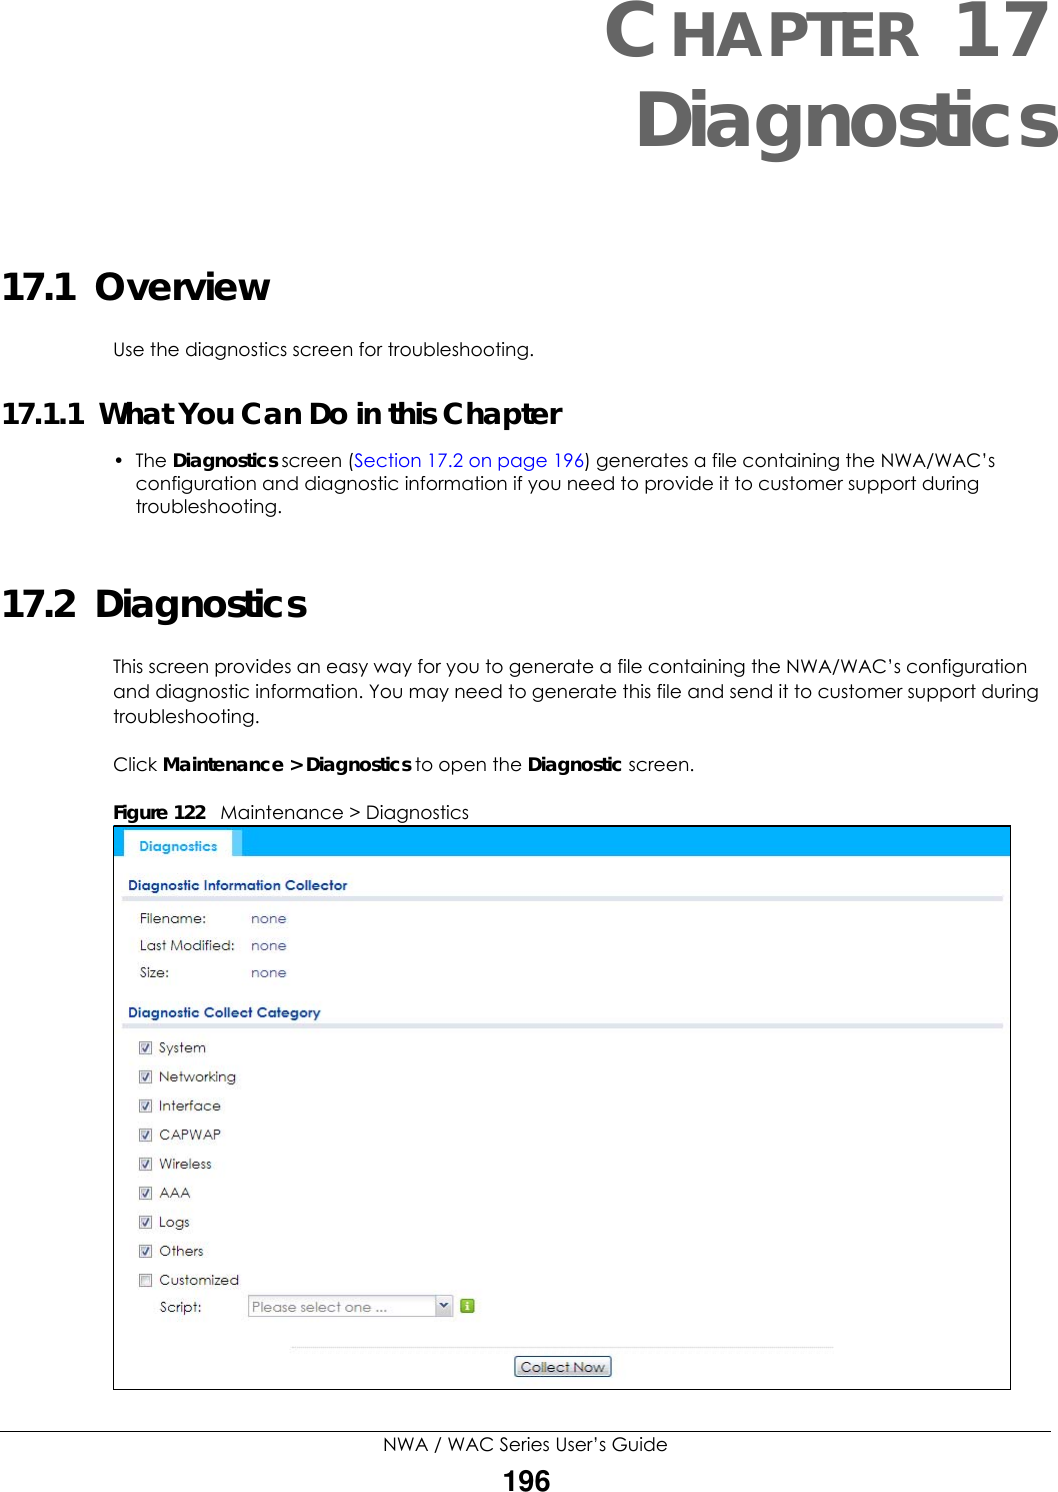 NWA / WAC Series User’s Guide196CHAPTER 17Diagnostics17.1  OverviewUse the diagnostics screen for troubleshooting. 17.1.1  What You Can Do in this Chapter• The Diagnostics screen (Section 17.2 on page 196) generates a file containing the NWA/WAC’s configuration and diagnostic information if you need to provide it to customer support during troubleshooting.17.2  Diagnostics This screen provides an easy way for you to generate a file containing the NWA/WAC’s configuration and diagnostic information. You may need to generate this file and send it to customer support during troubleshooting.Click Maintenance &gt; Diagnostics to open the Diagnostic screen. Figure 122   Maintenance &gt; Diagnostics  